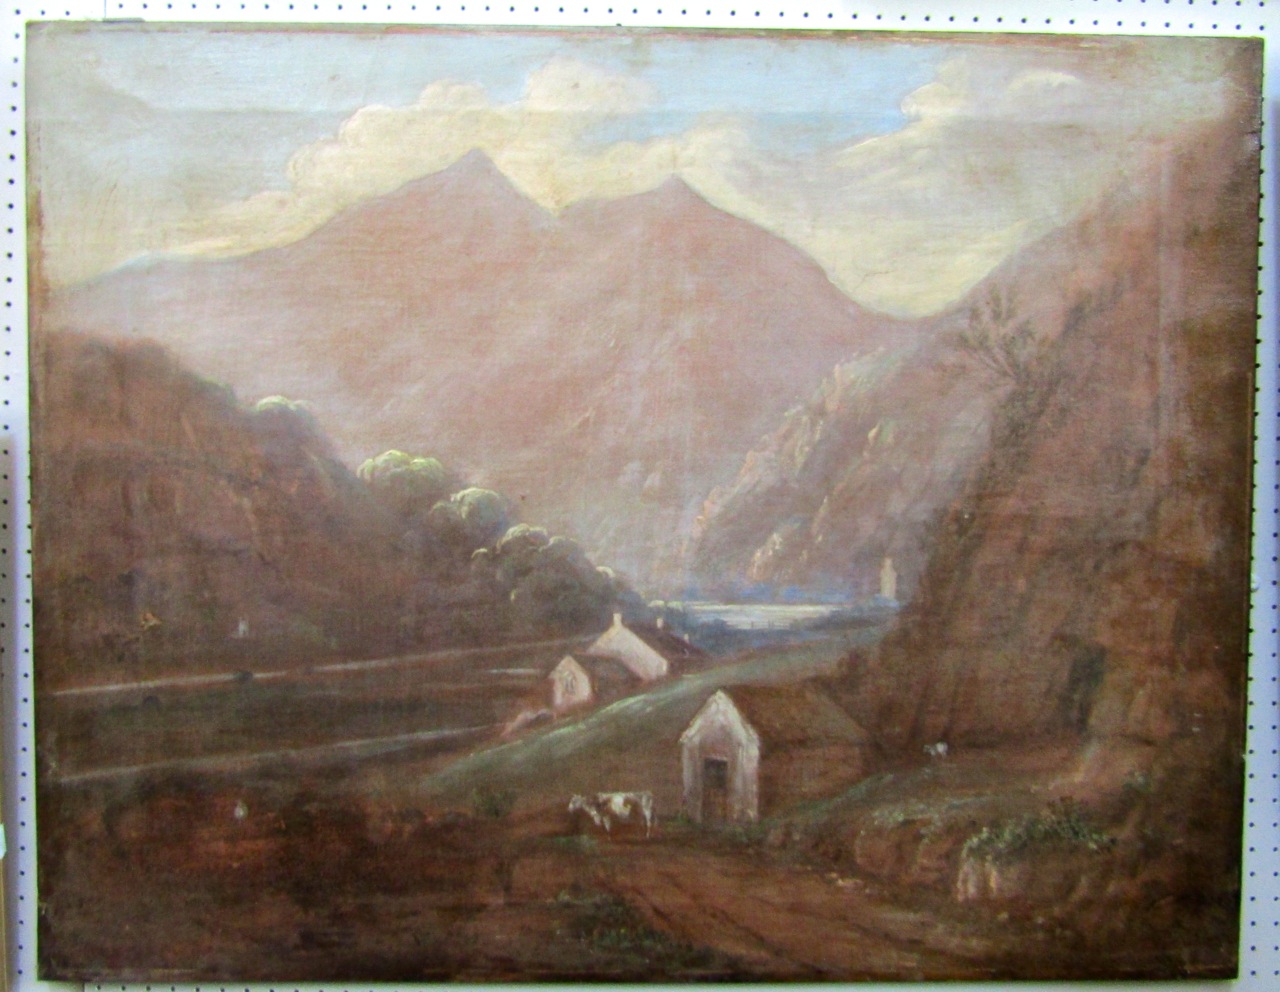 A 19th century oil painting on canvas of a mountainous landscape with cow and sheep to the